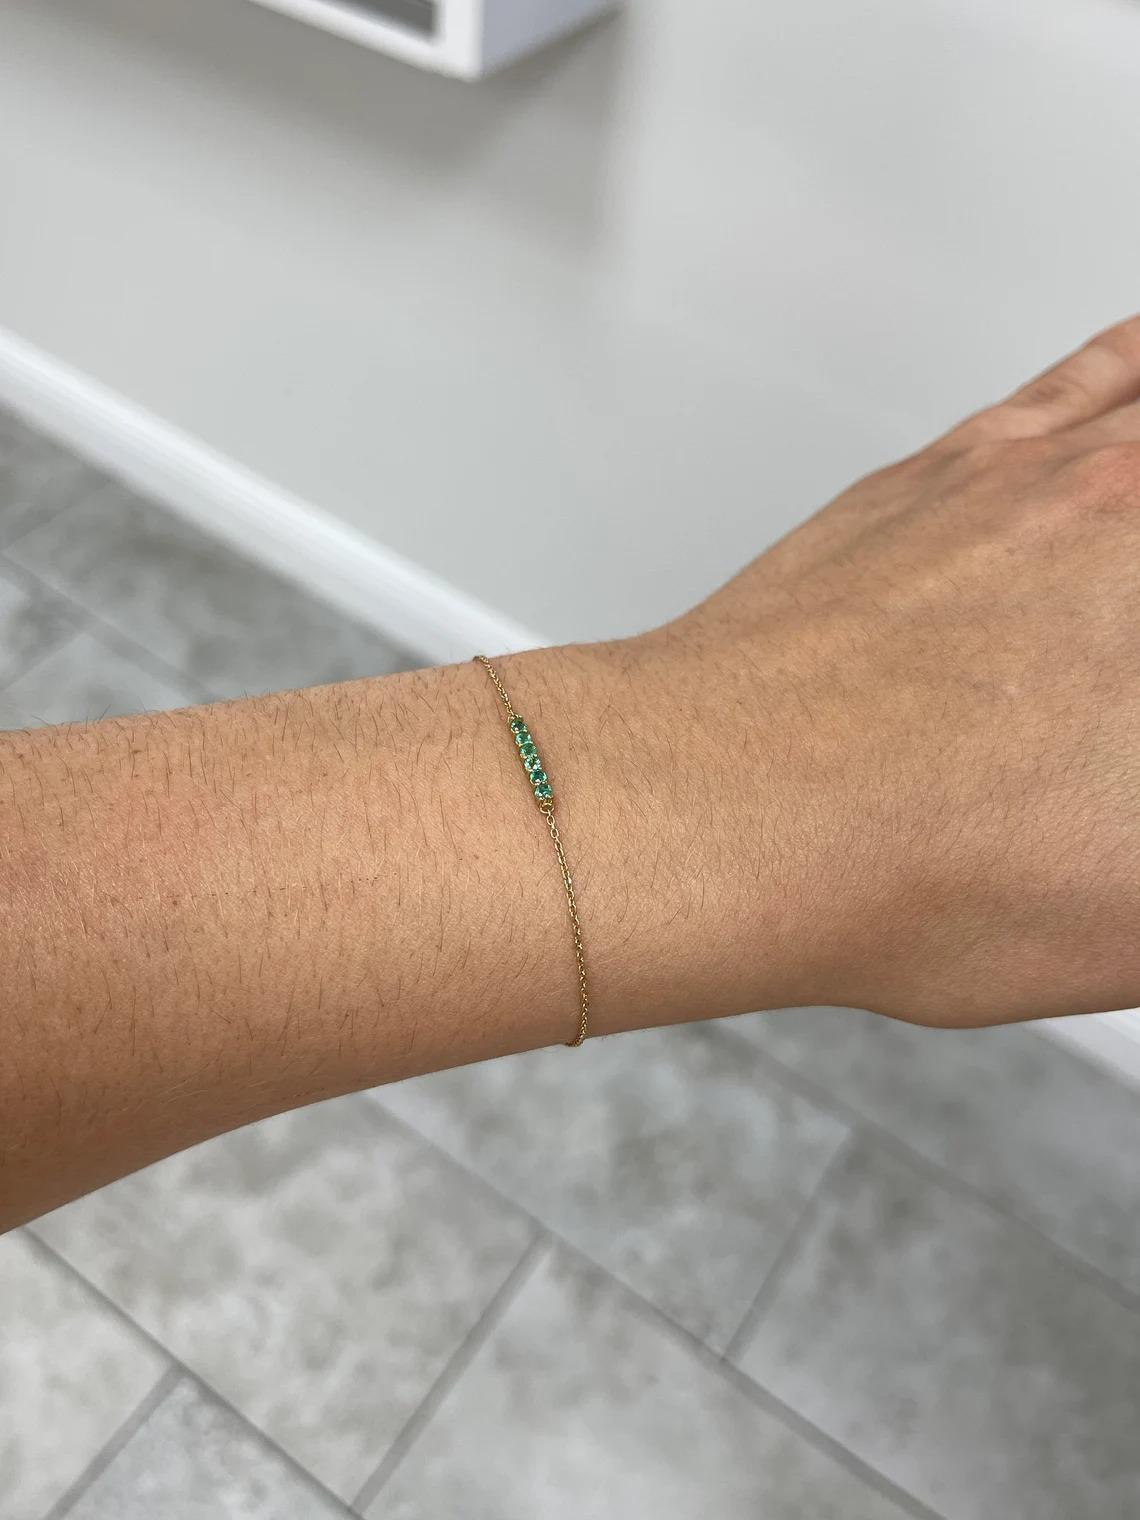 A lovely, simple emerald bracelet. This piece displays six petite round-cut emeralds set in a prong set bar. The gemstones display a gorgeous medium green color with excellent clarity and vividness. Attached to a thin cable chain, that measures 7.5